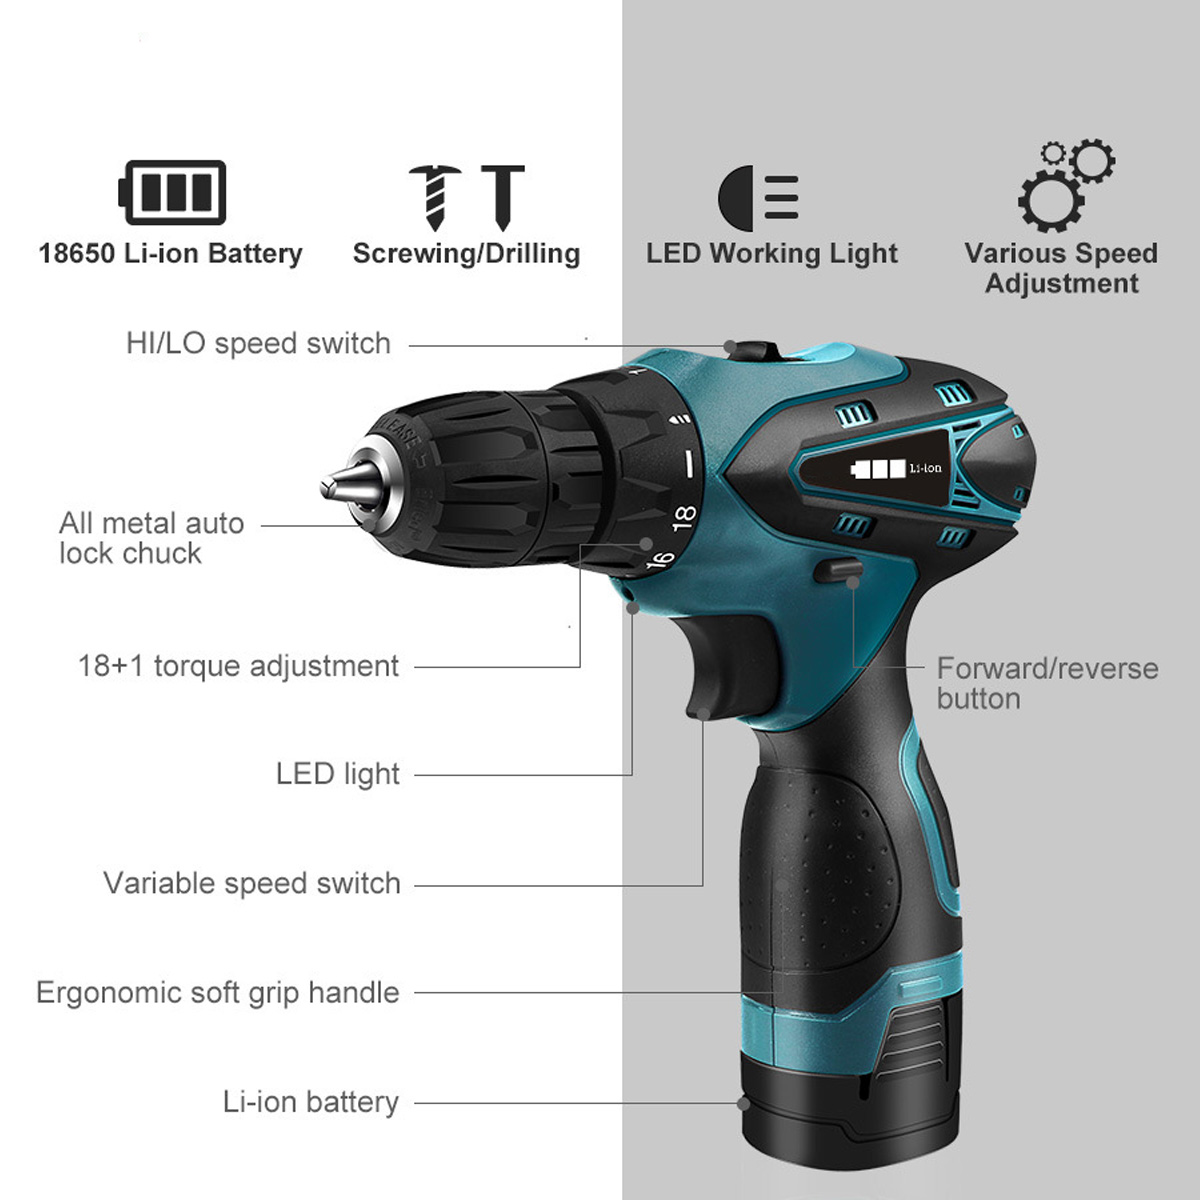 168V-Cordless-Electric-Drill-Driver-231-Torque-Multifuntional-Screwdriver-Power-Tool-W-Battery--Dril-1863336-5